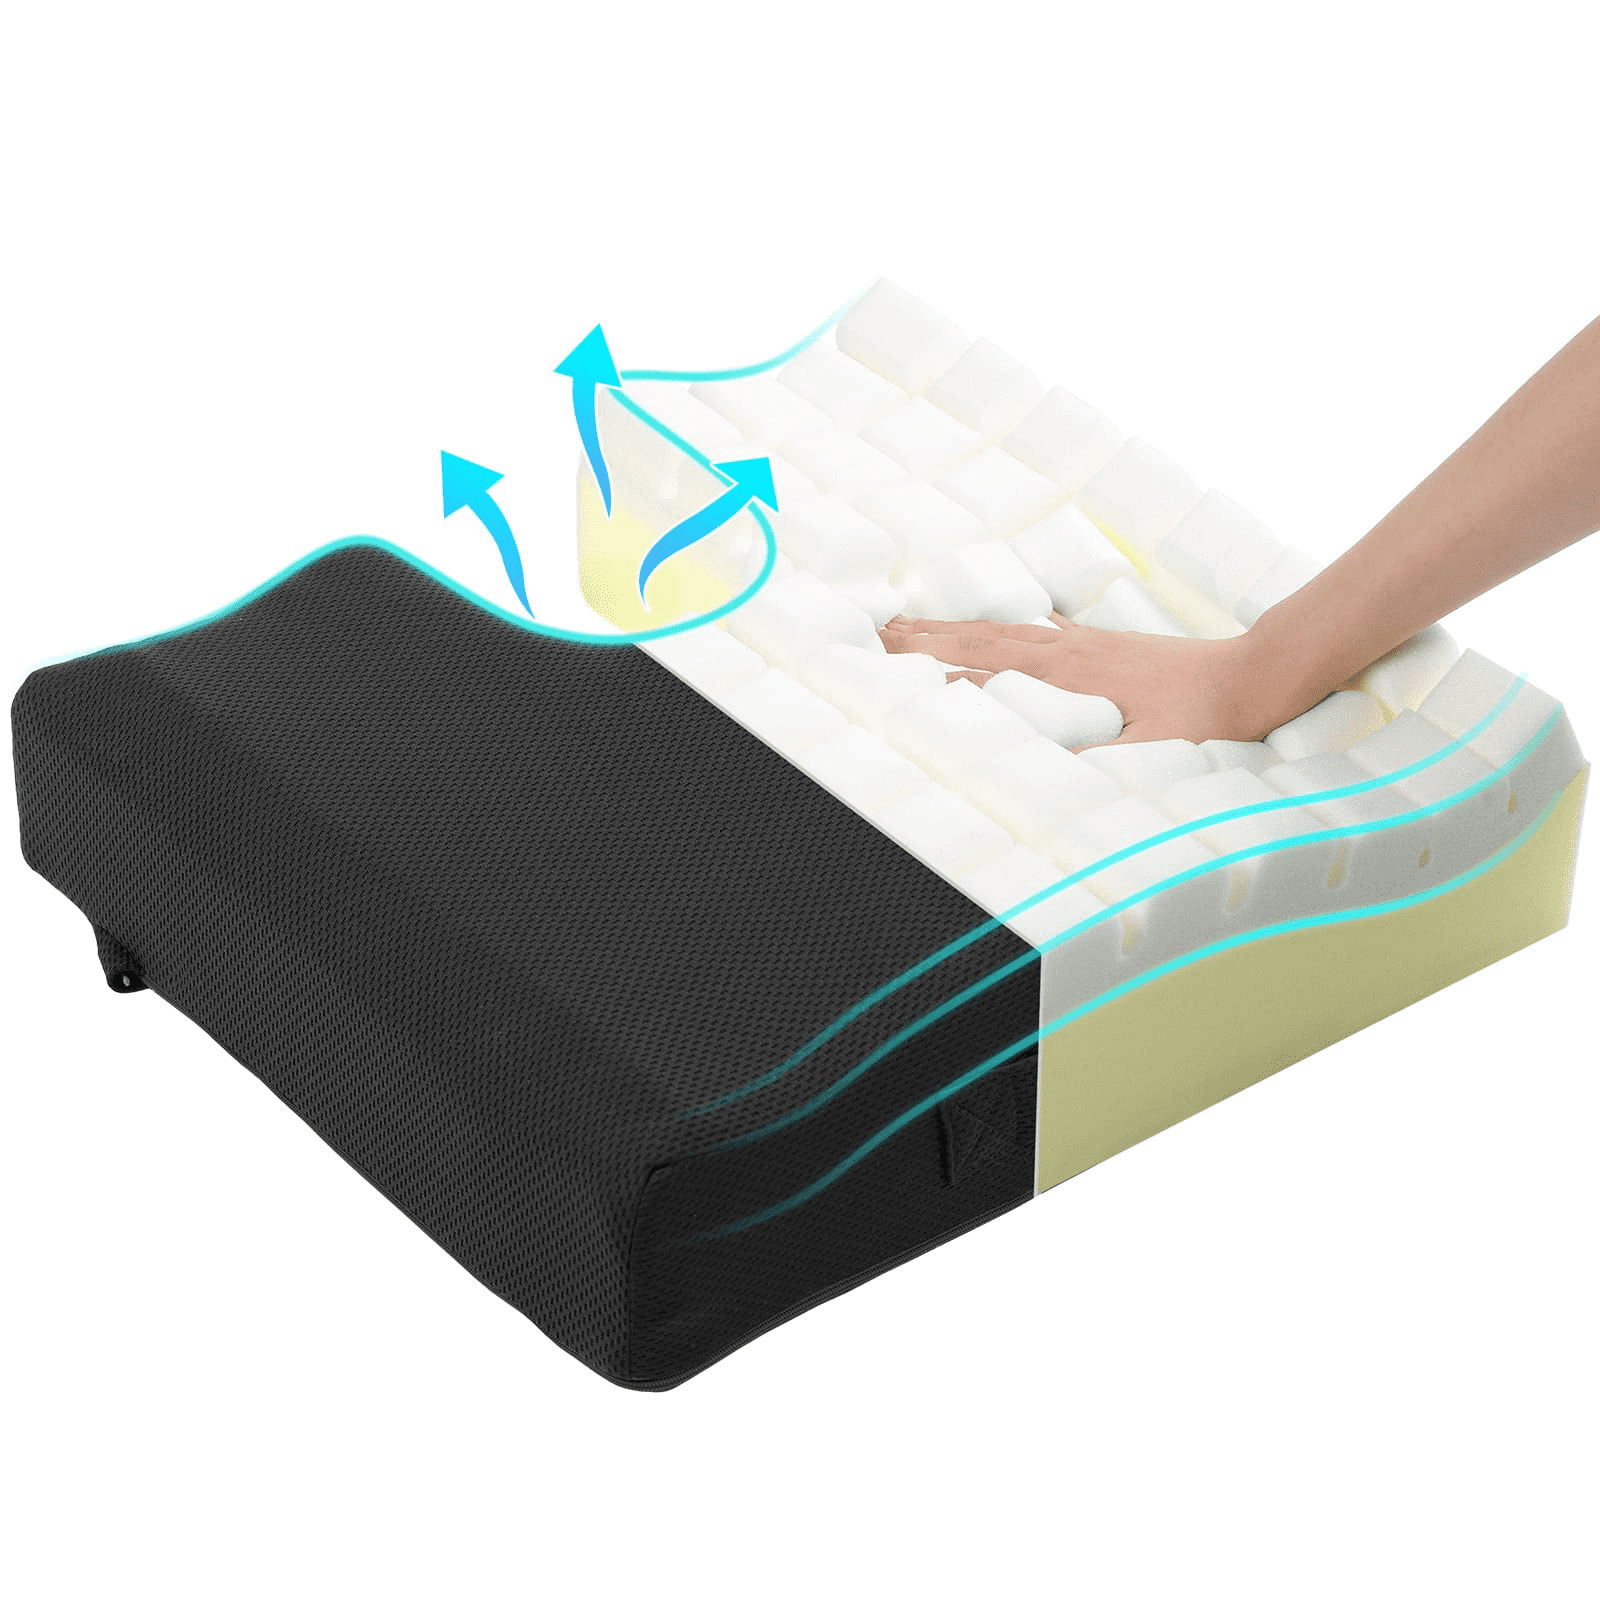  Square Memory Foam Seat Cushion,Orthopedic Thick Car Seat  Cushions to Raise Height Chair Pad for Support Low Back Pain-m  404012cm(16x16x5inch) : Office Products